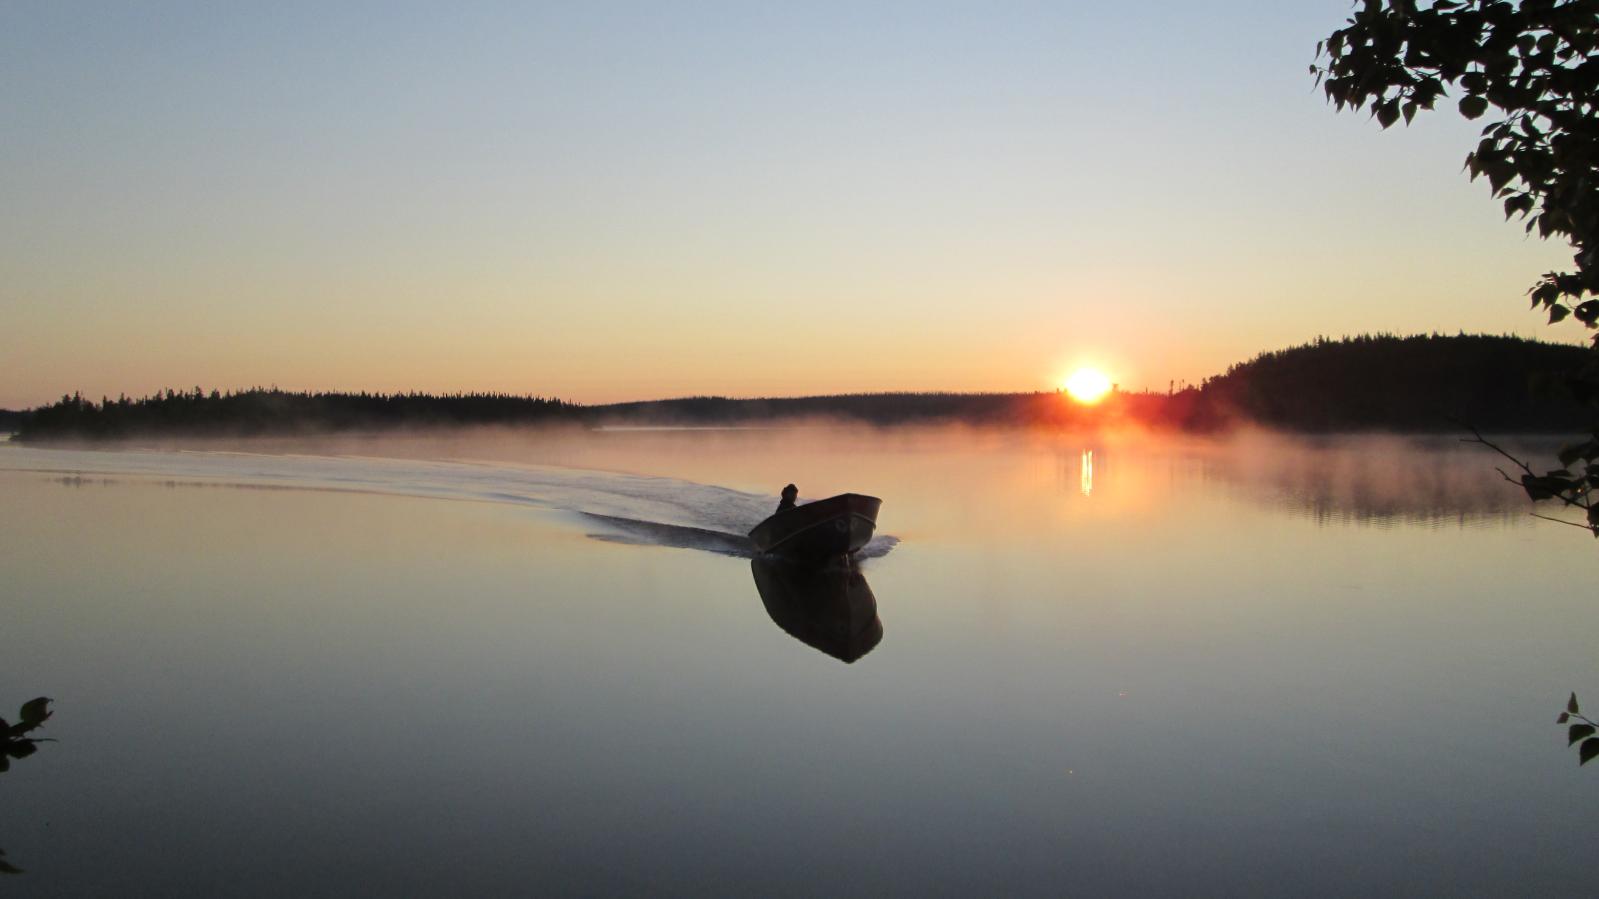 A motor boat returning to camp on a placid lake near dusk with the sun setting in the background 